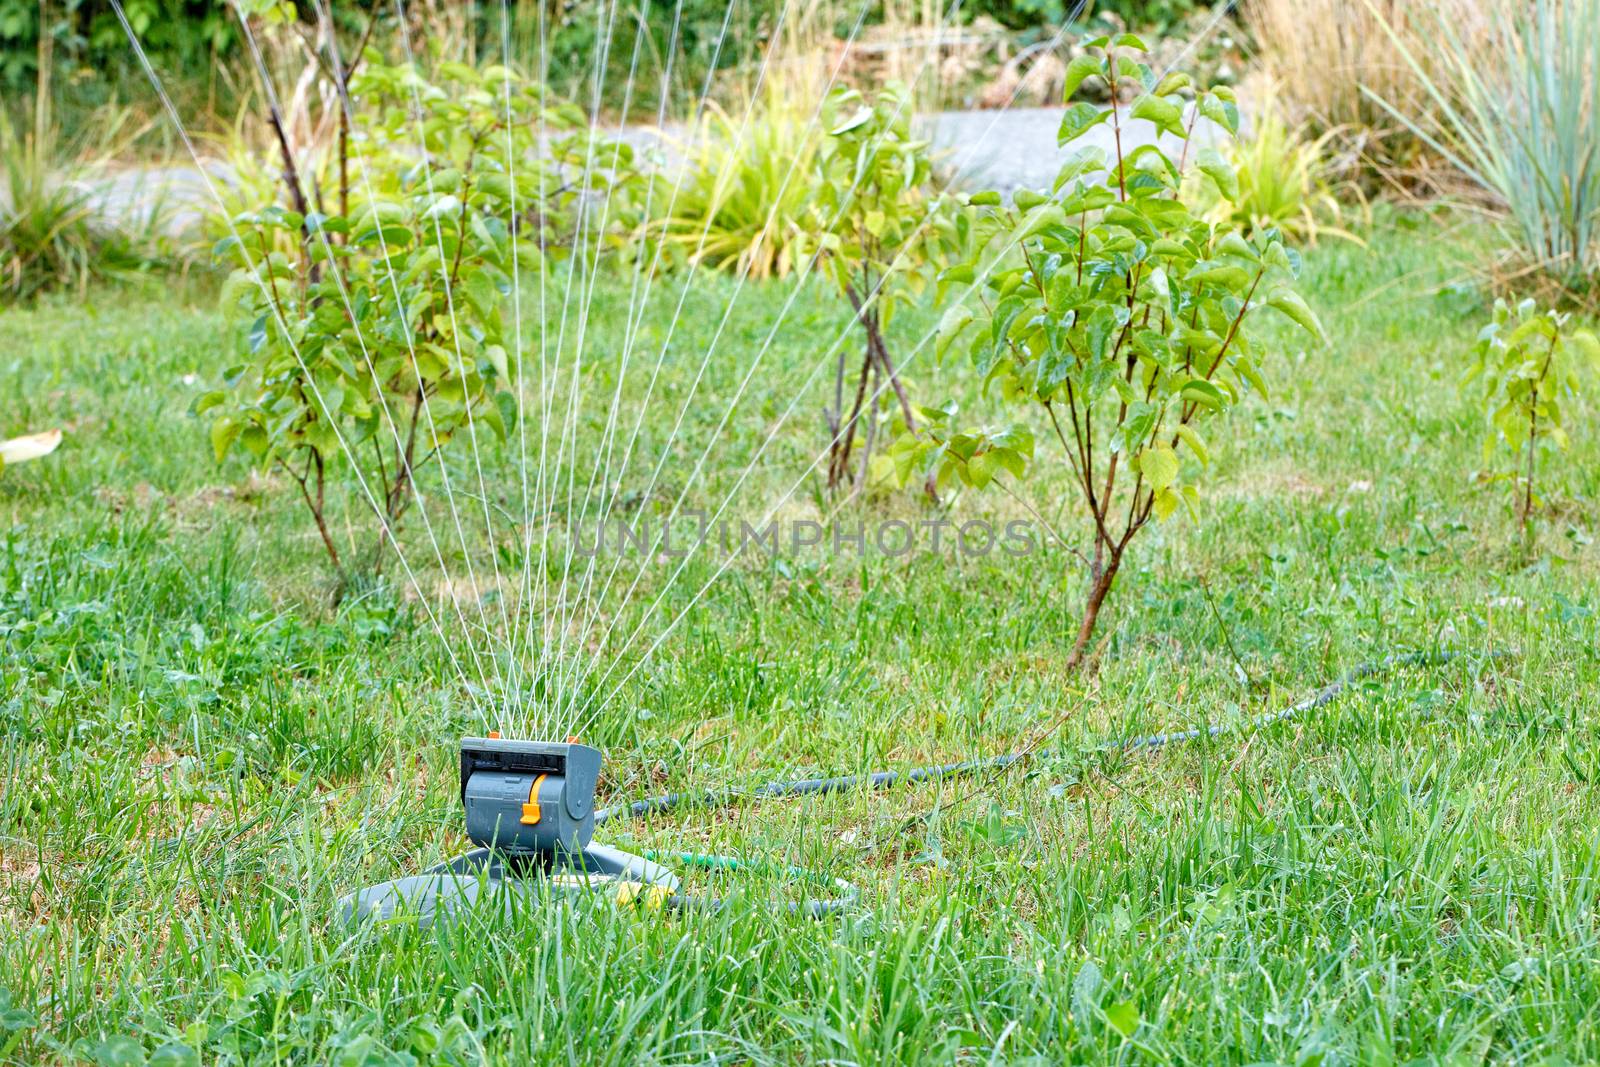 The multidirectional water jets of the oscillating sprayer water the young trees and the lawn in the young garden.